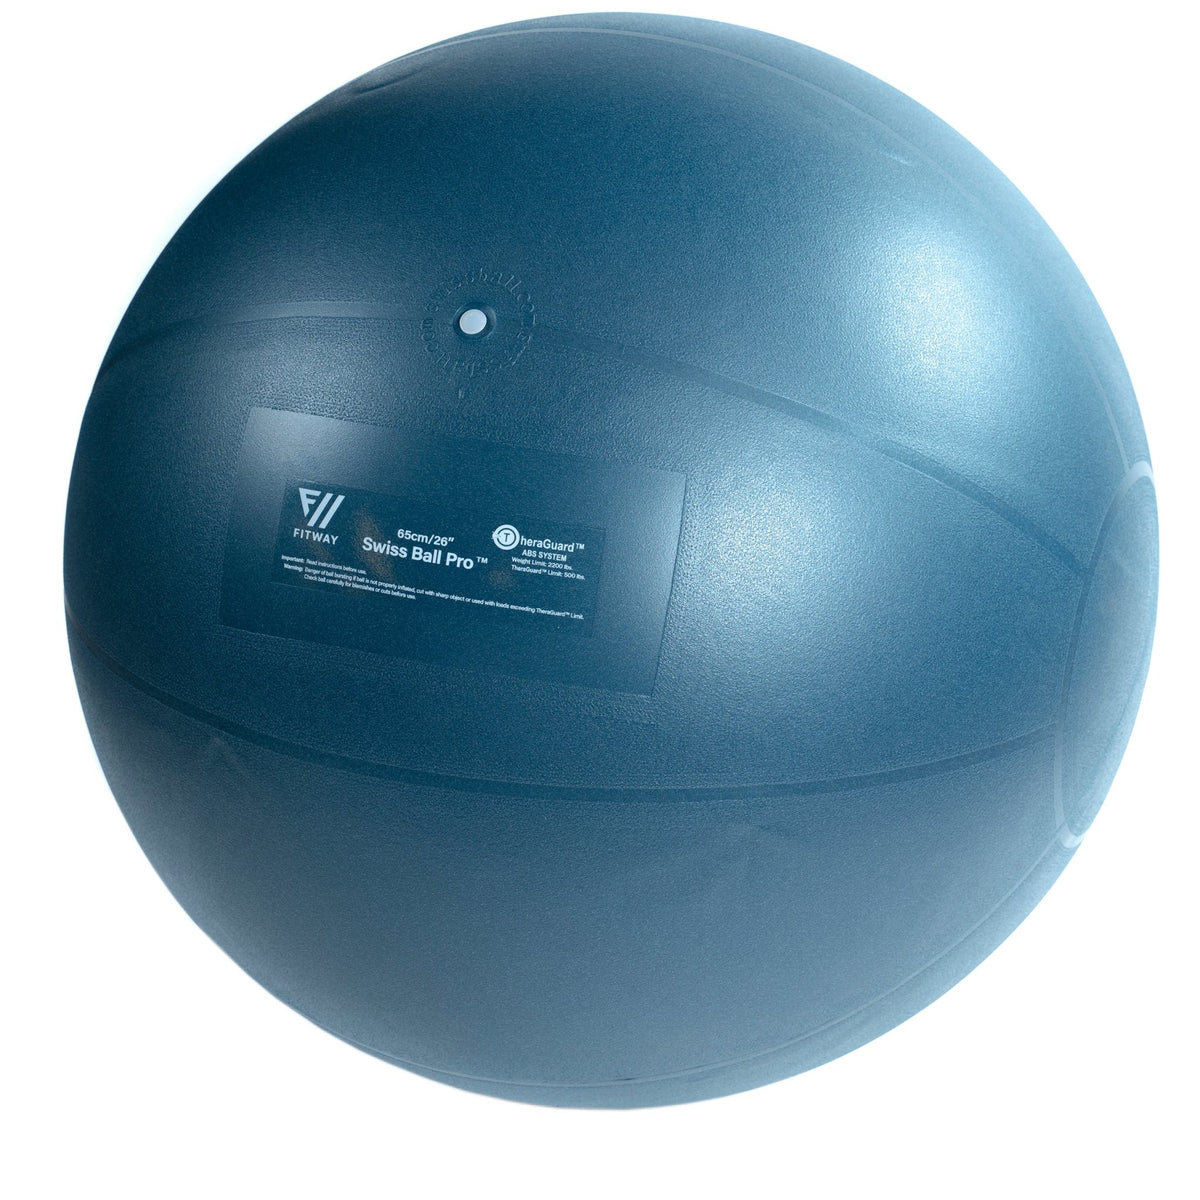 FitWay Equip. 65cm FitWay Stability Ball - Fitness Experience